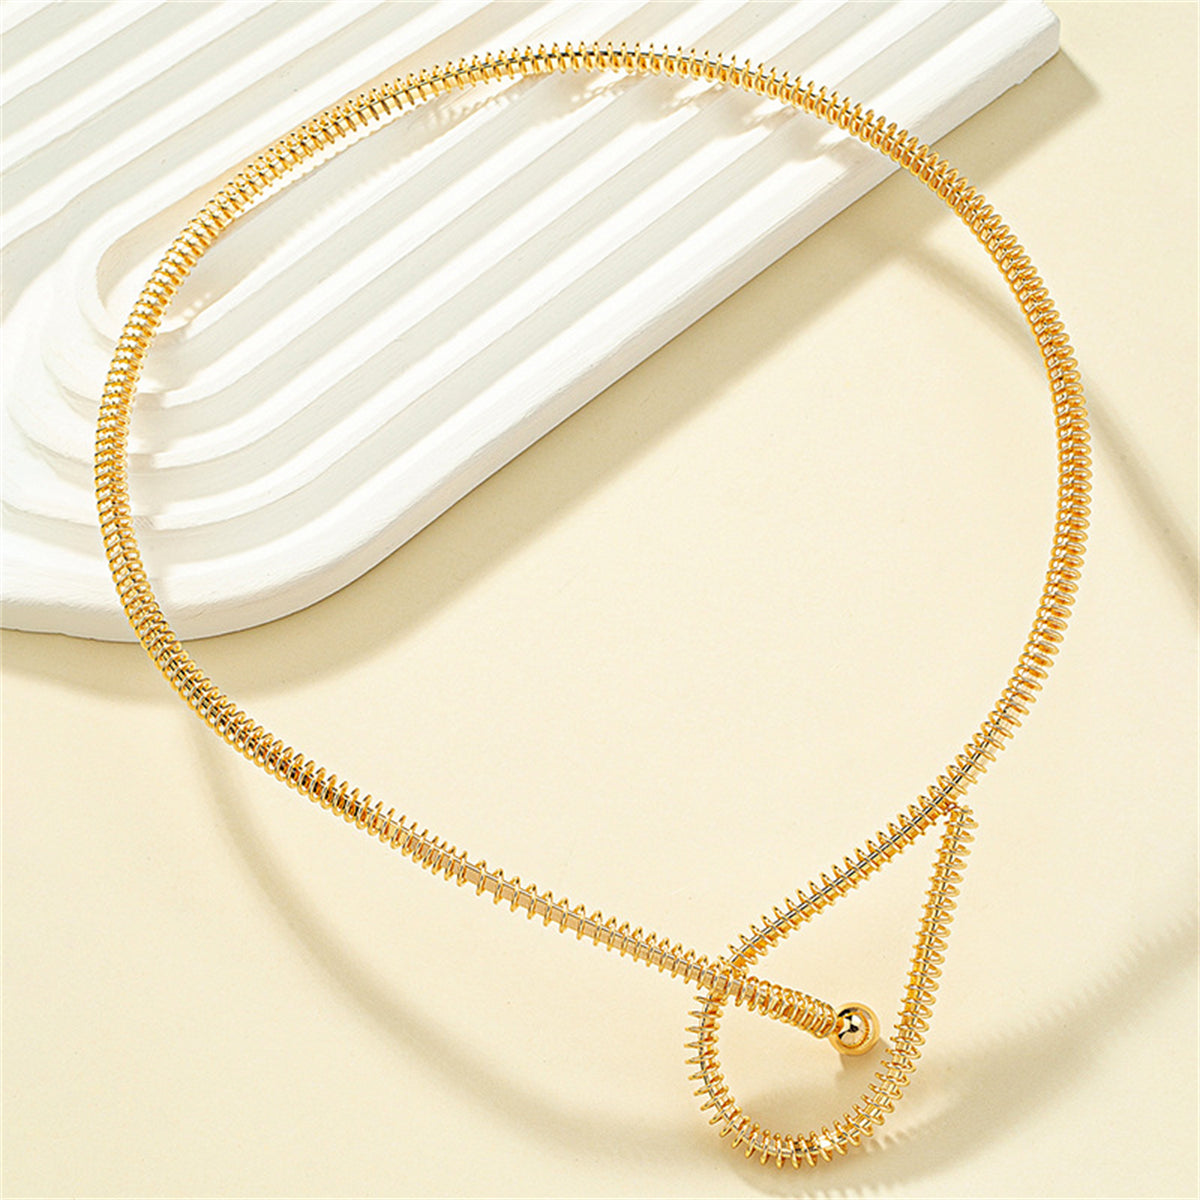 18K Gold-Plated Textured Knot Choker Necklace